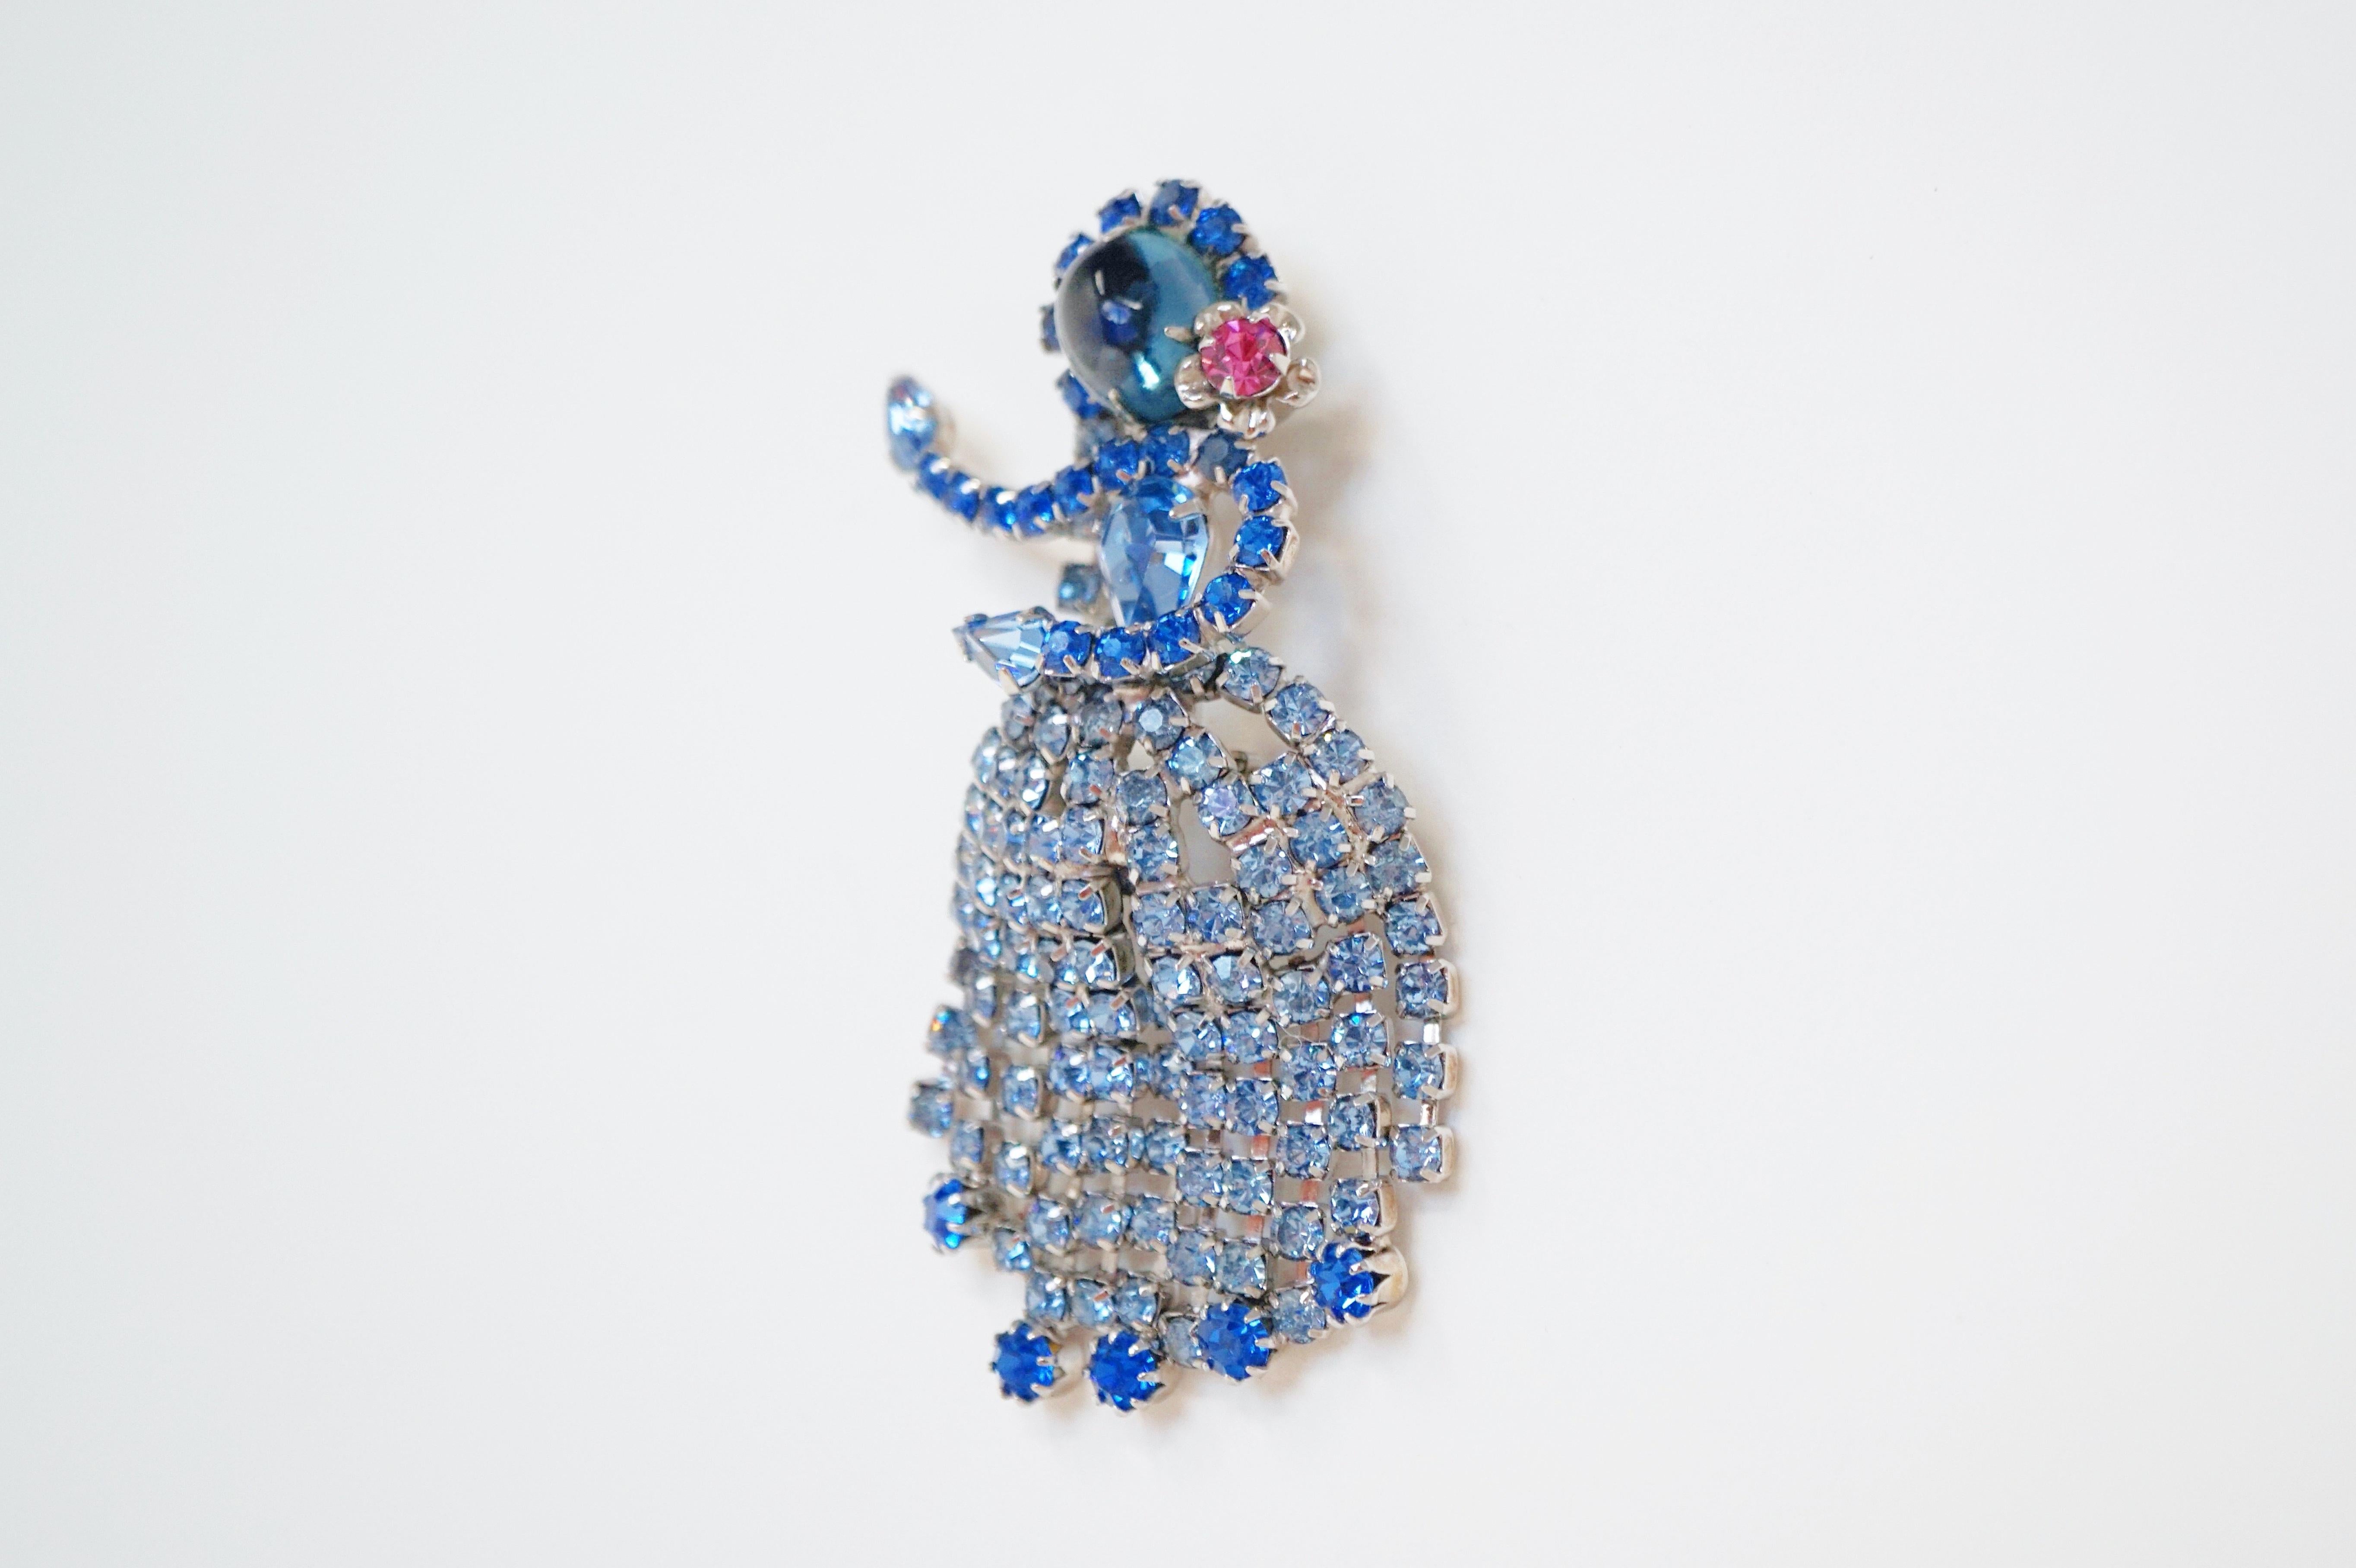 This gorgeous rhinestone Hula Dancer brooch by Hobé, circa 1965, features sky blue and azure rhinestones, a glass cabochon and a pink rhinestone flower accent with silver tone hardware. 
This brooch was manufactured during the mid-60's in several